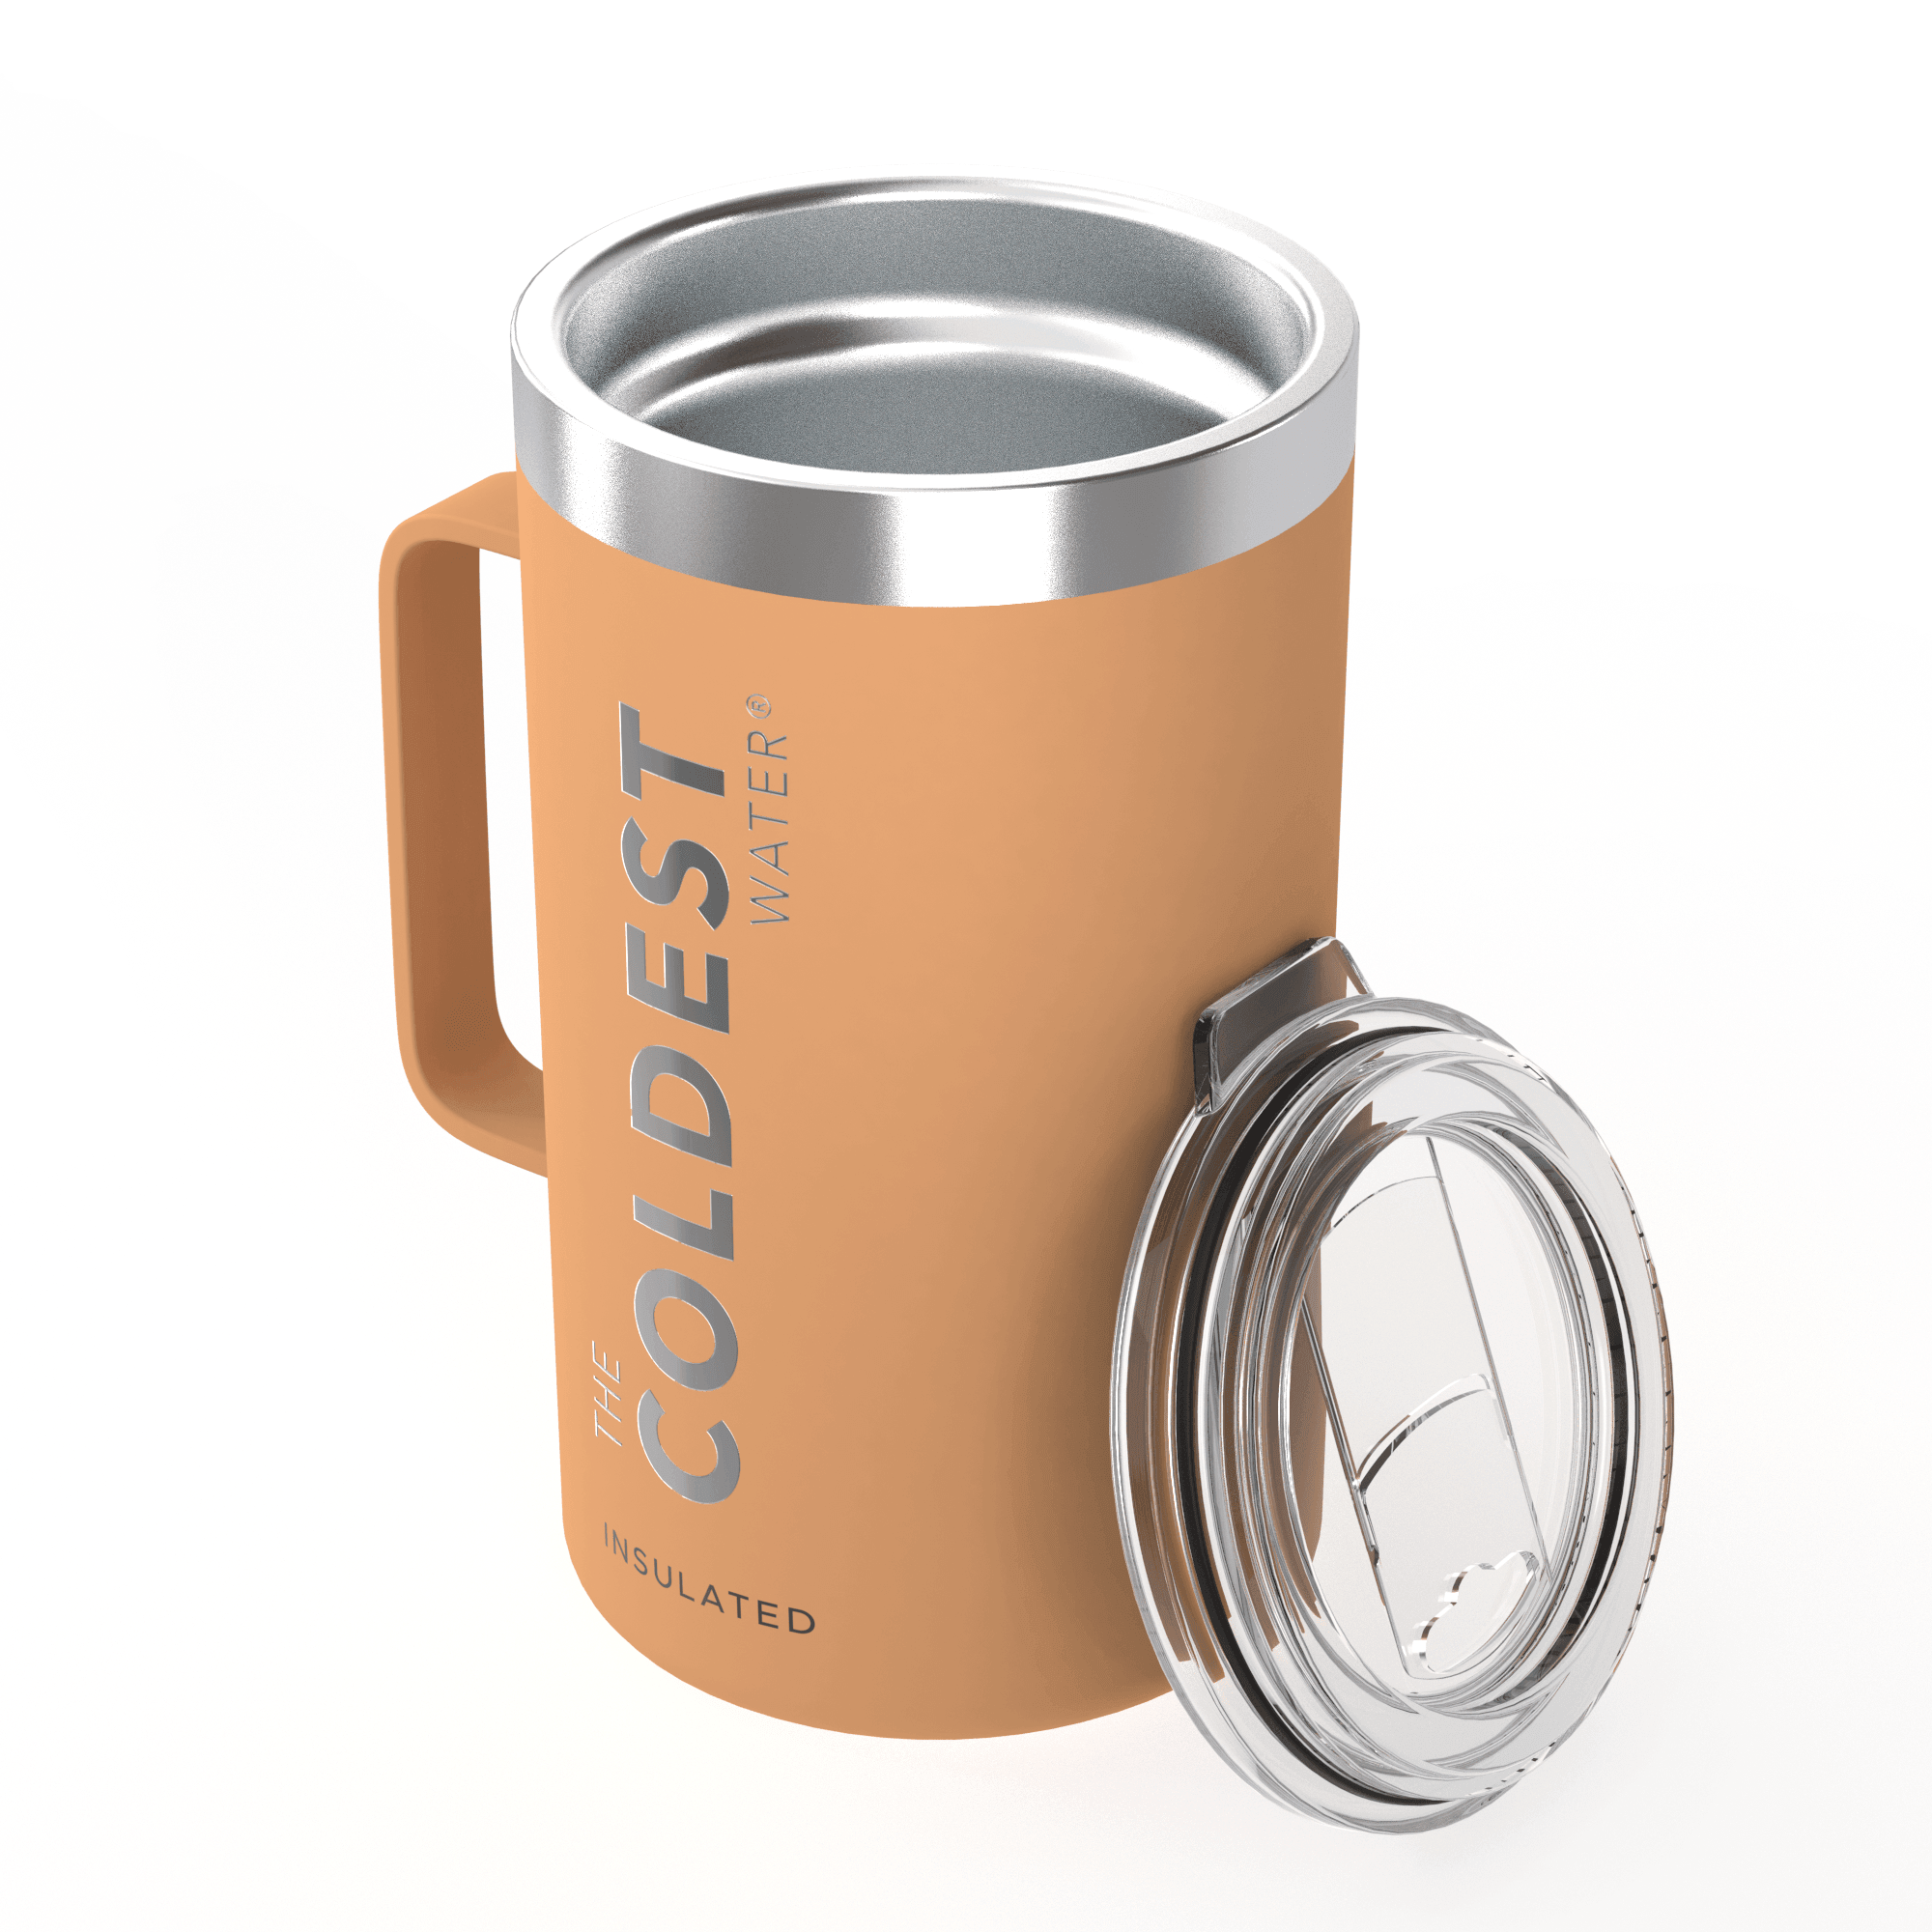 The Coldest Coffee Mug - Stainless Steel Super Insulated Travel Mug for Hot & Cold Drinks, Best for Tea, Lattes, Cappuccino Coffee Cup( Epic White 24